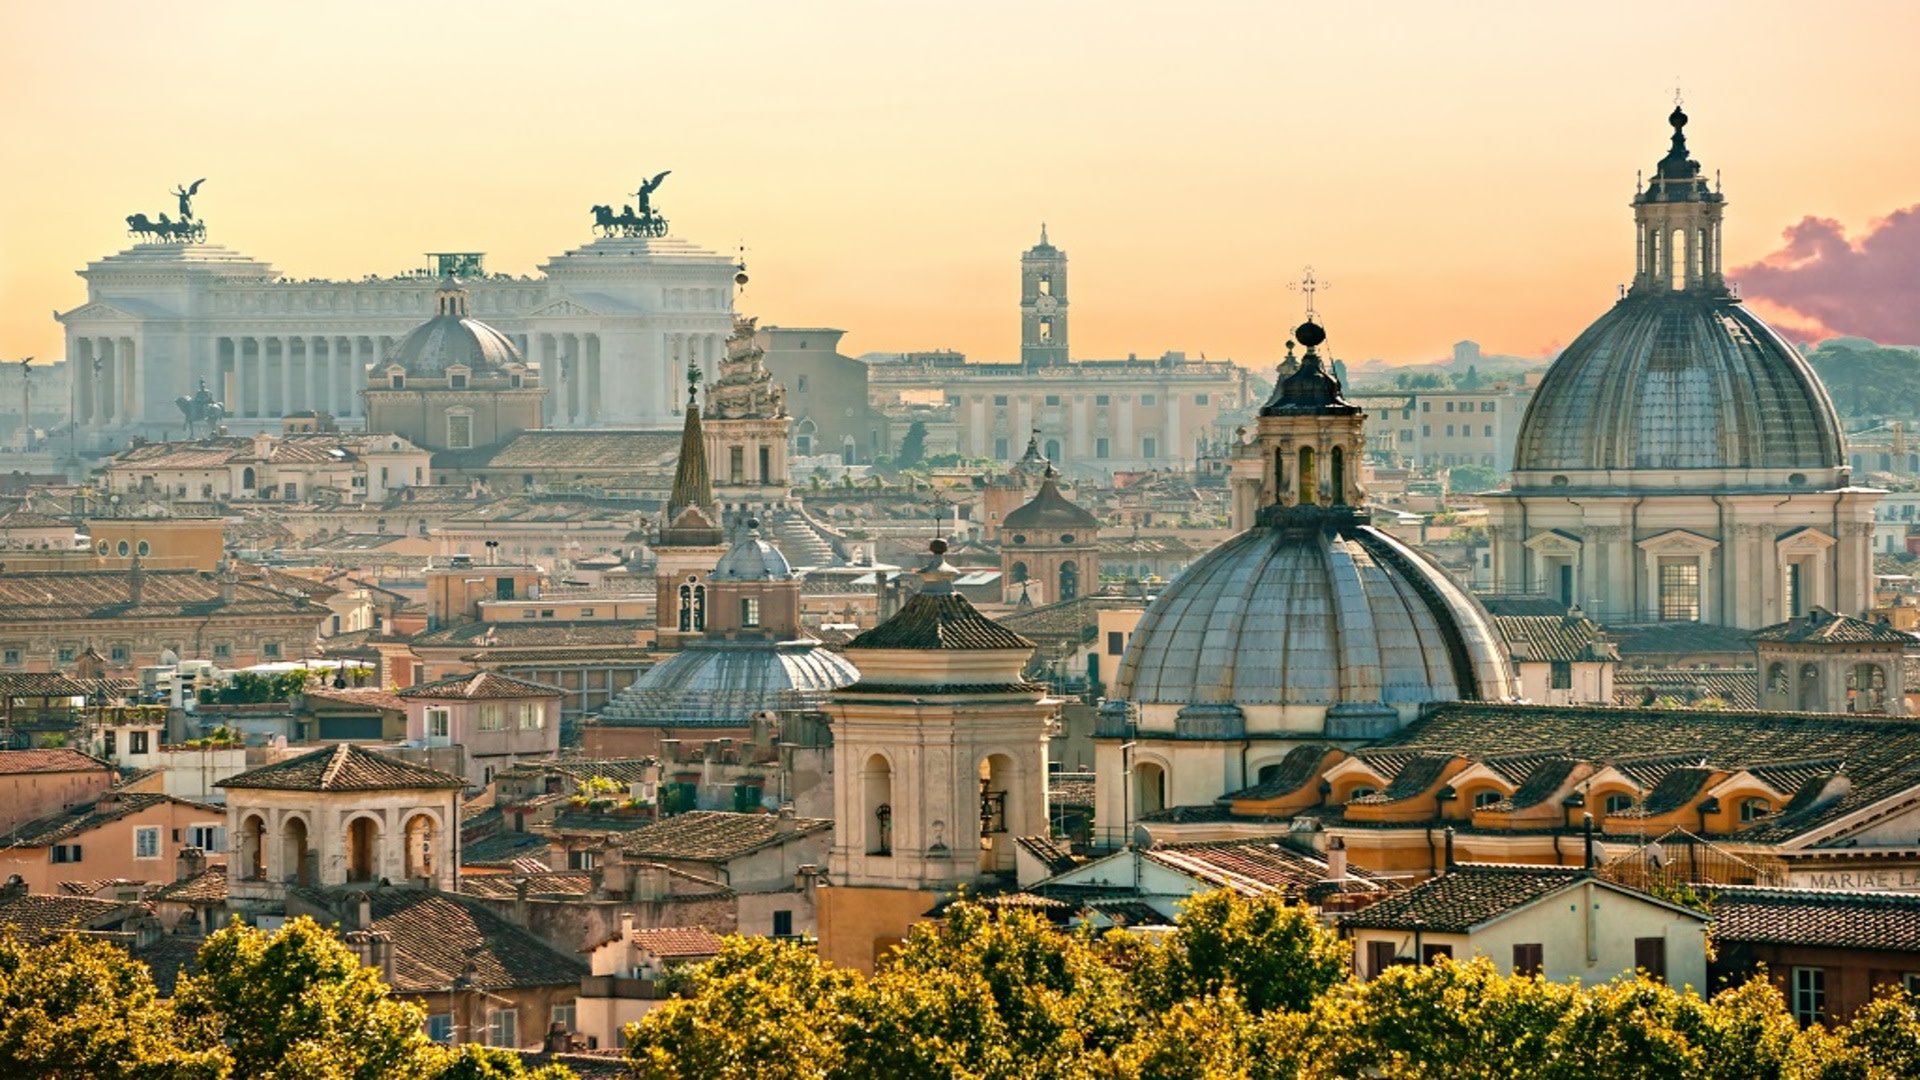 tourhub | Today Voyages | Discovering Rome 